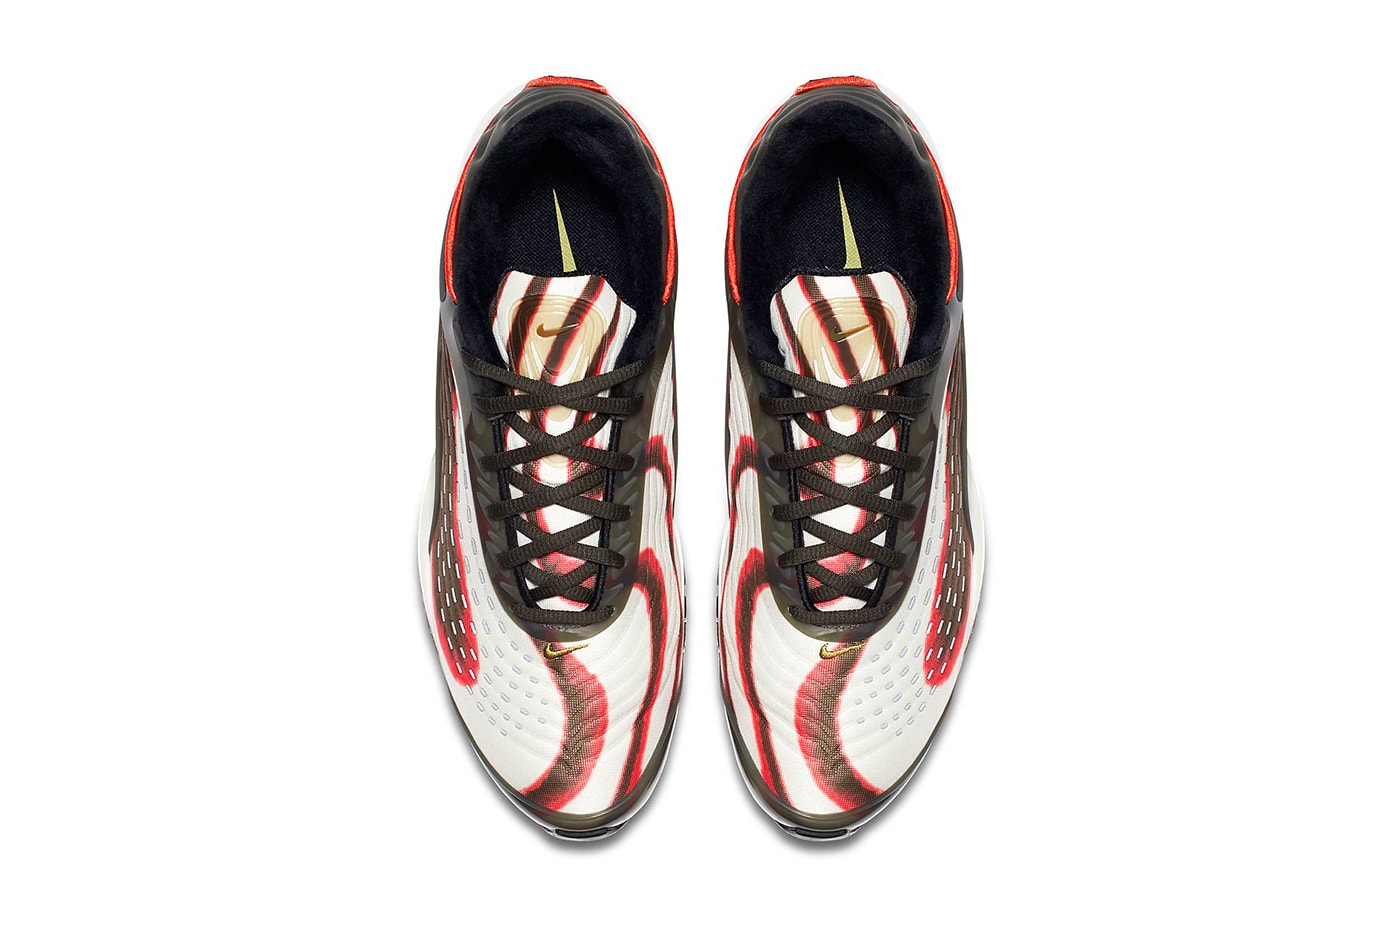 Nike Air Max Deluxe sequoia official images 2018 footwear nike sportswear